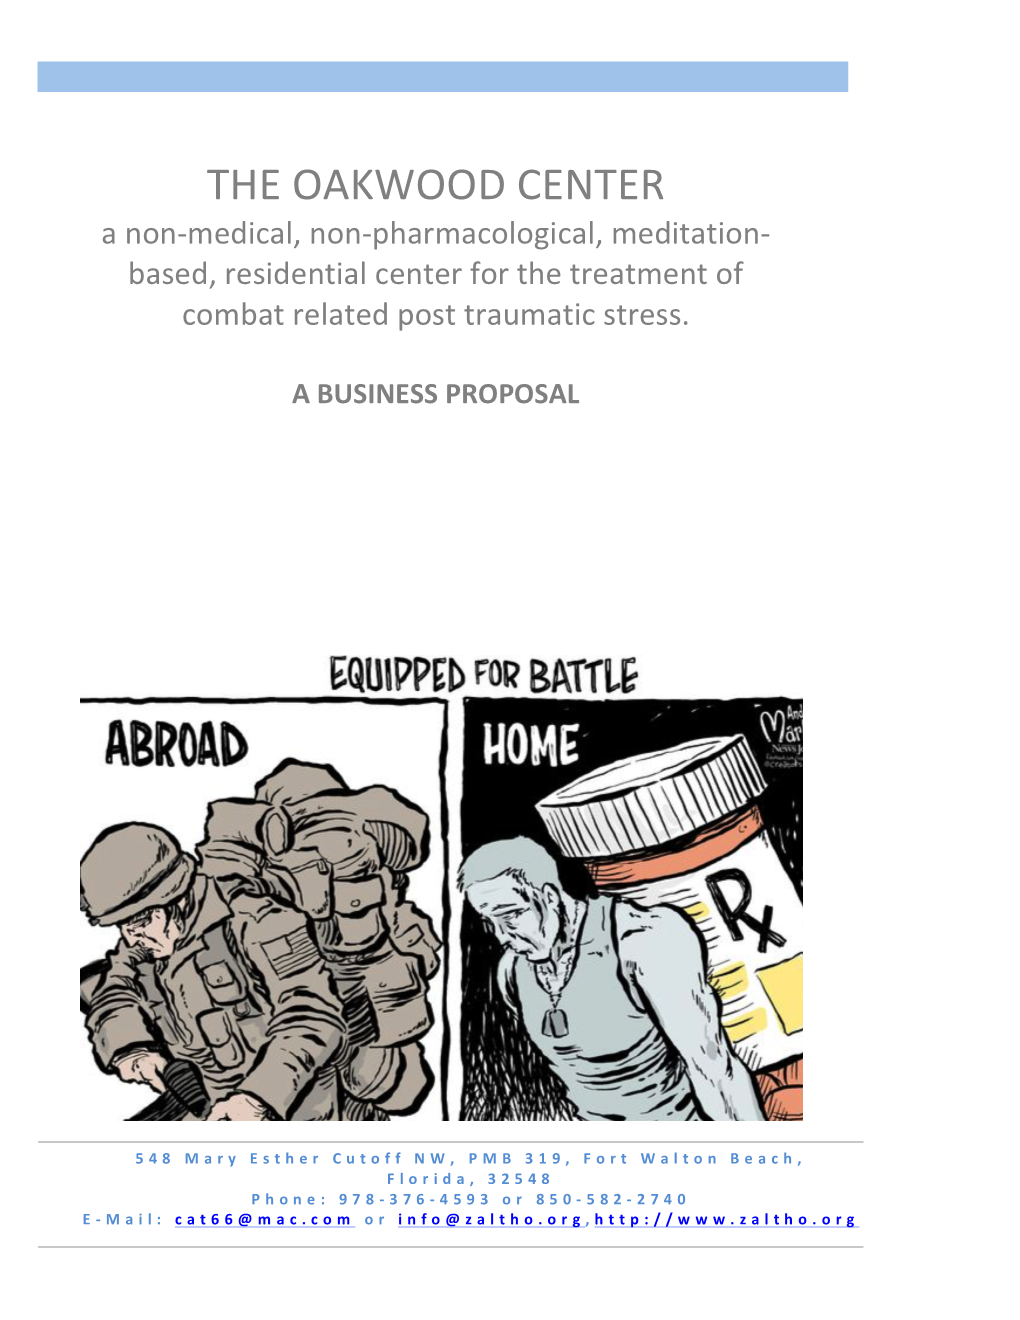 THE OAKWOOD CENTER a Non-Medical, Non-Pharmacological, Meditation- Based, Residential Center for the Treatment of Combat Related Post Traumatic Stress